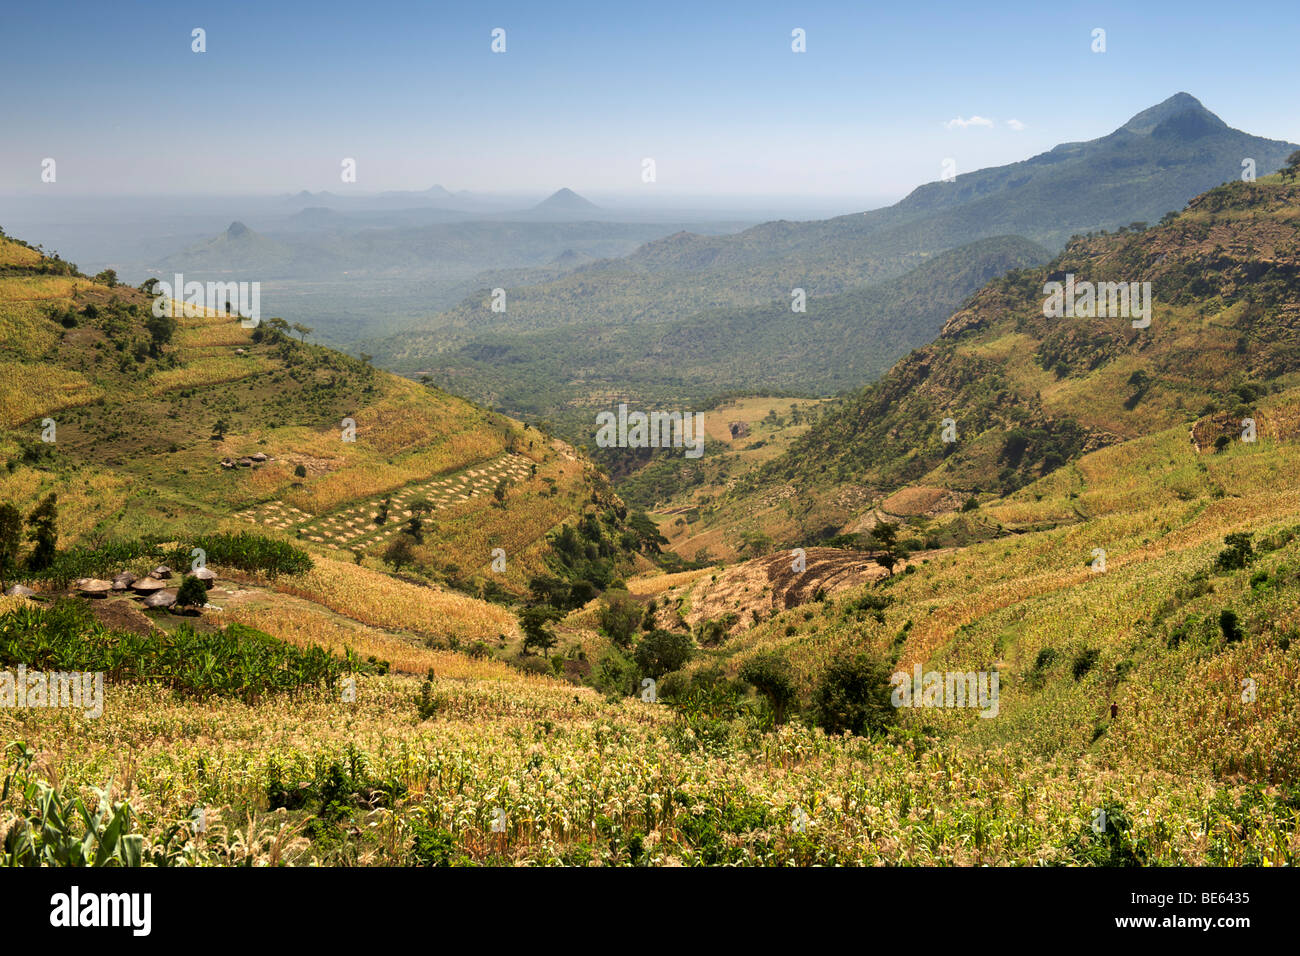 View across the Great Rift Valley from the slopes of Mount Elgon in Uganda. Stock Photo